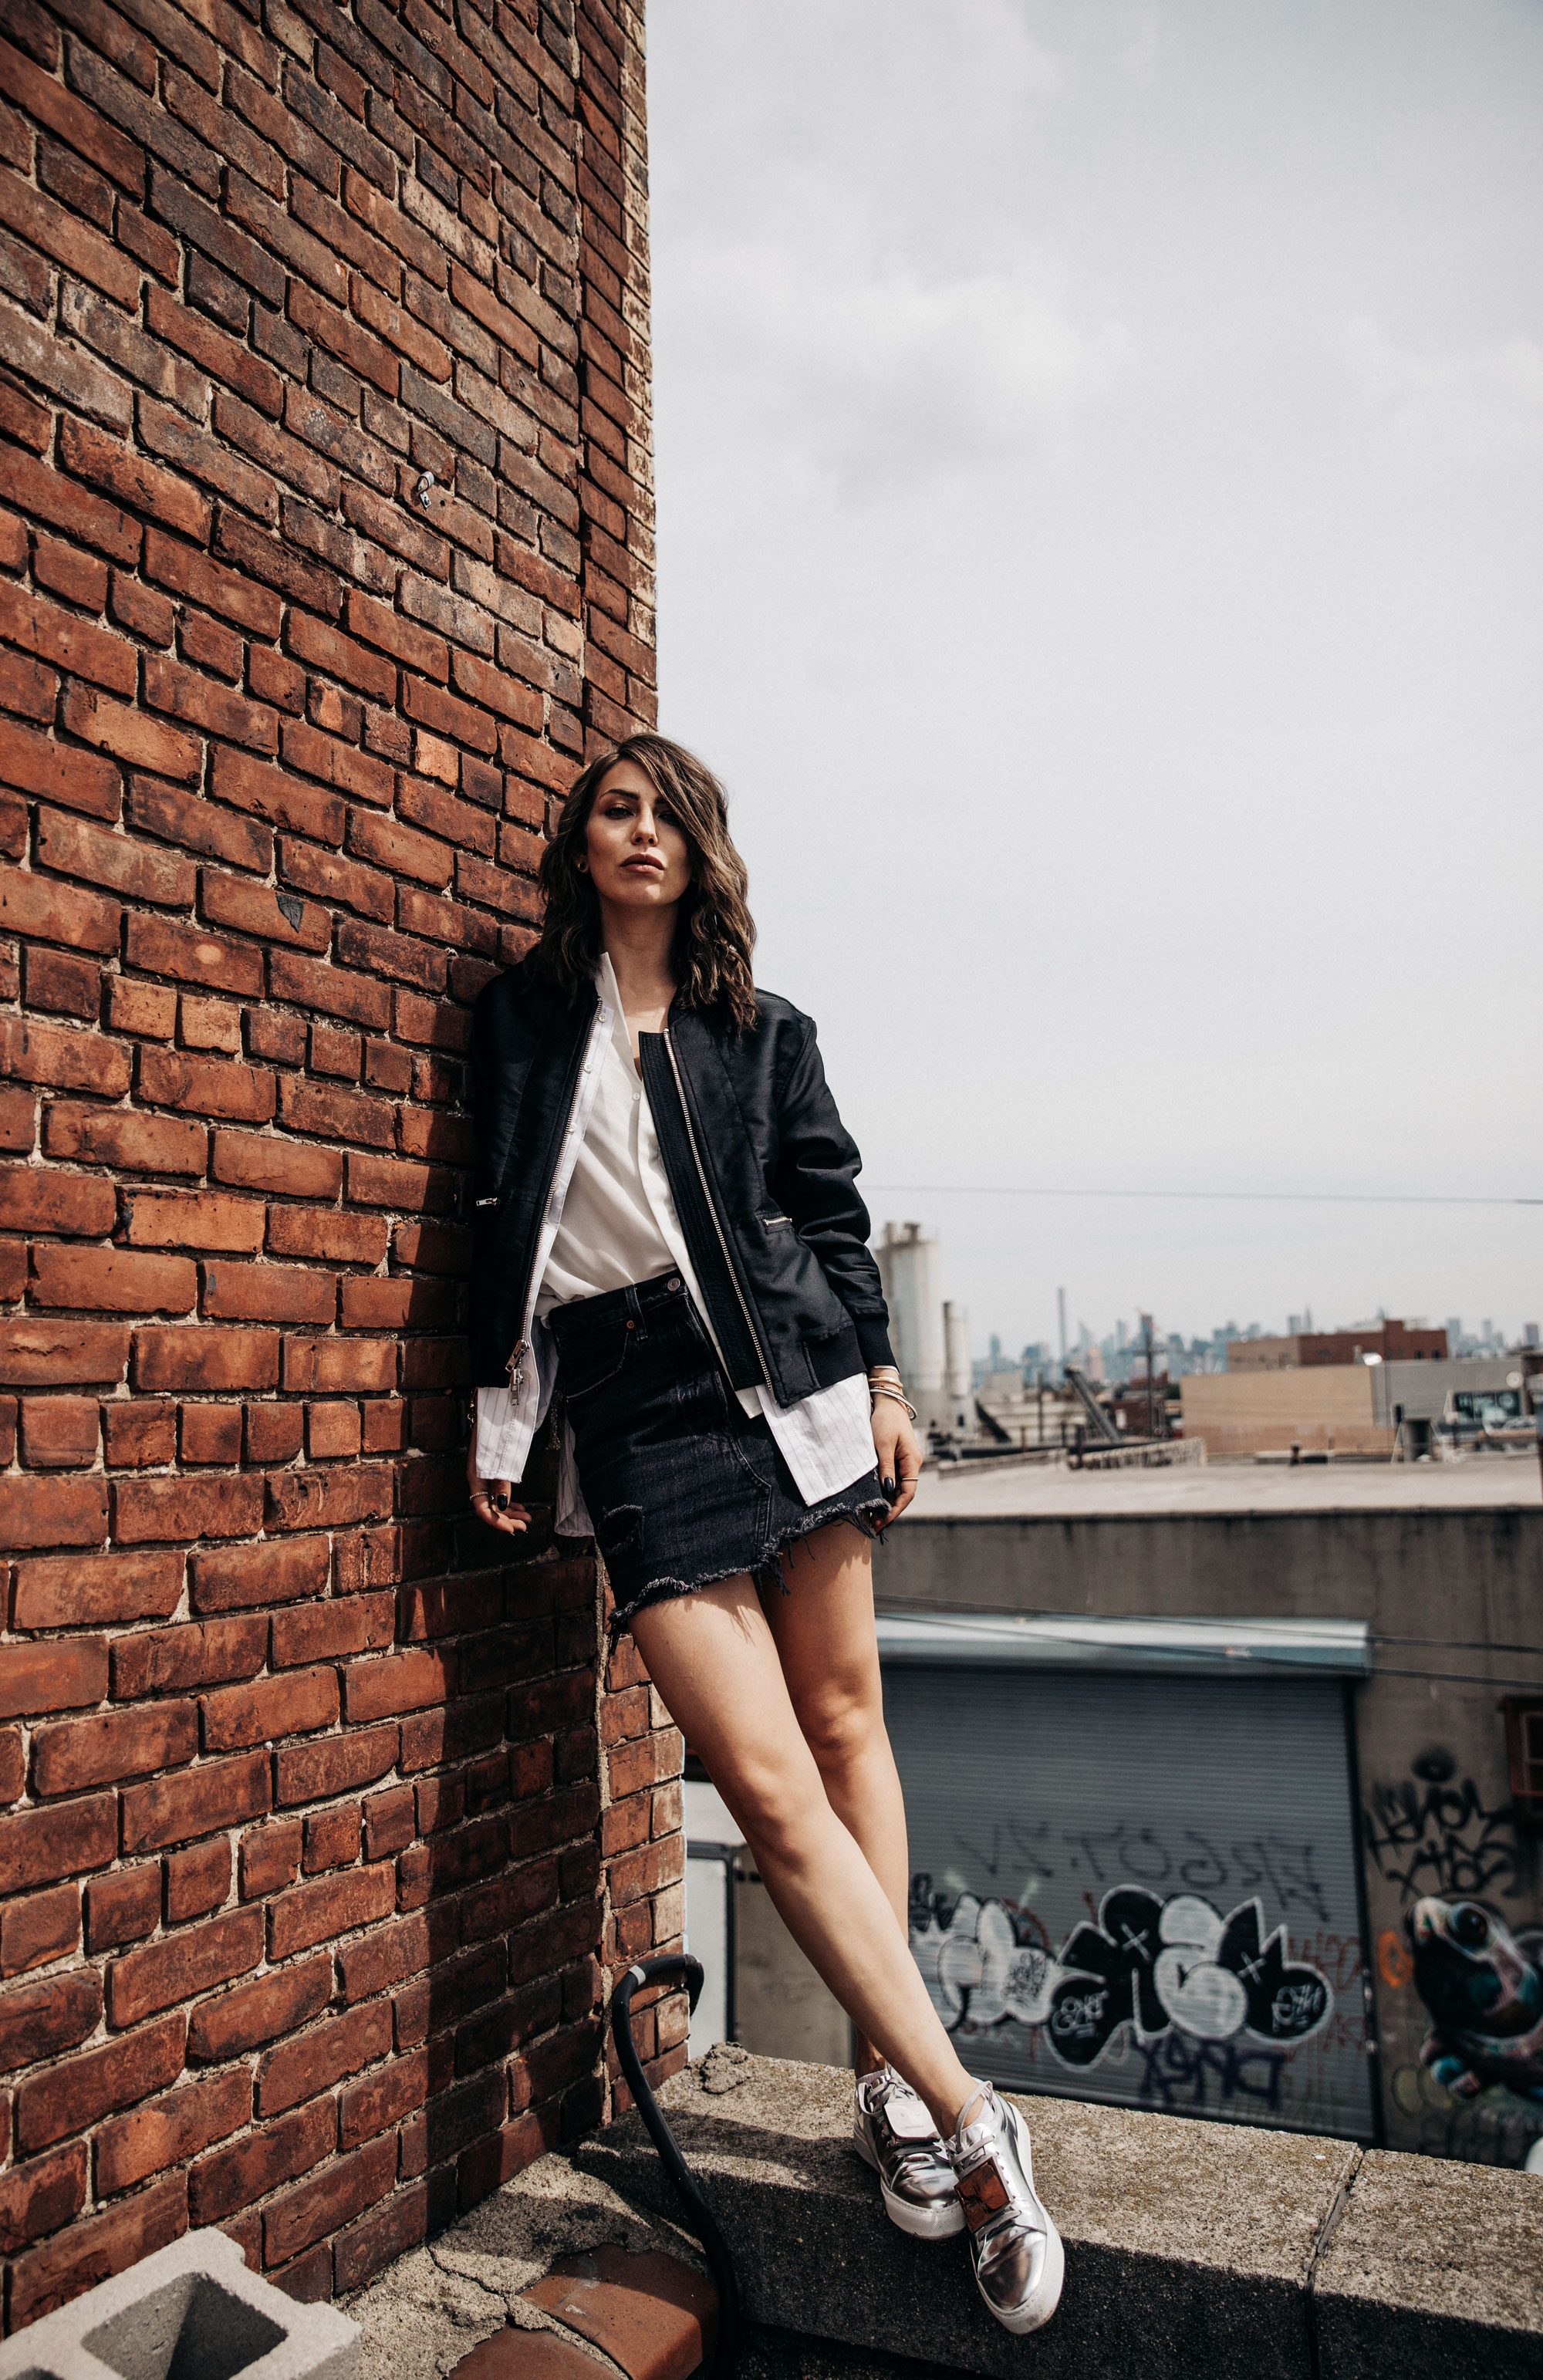 shooting on a rooftop in Brooklyn, NYC | New York | fashion | Editorial | Style | blogger Masha Sedgwick | products: Adriana Metallic Sneakers from Acne Studios, bomber jacket from 3.1 Phillip Lim, black denim skirt from  Levi's | photos: Theresa Kaindl | topic: Random Facts | edgy, sexy, sporty, grunge, cool, casual